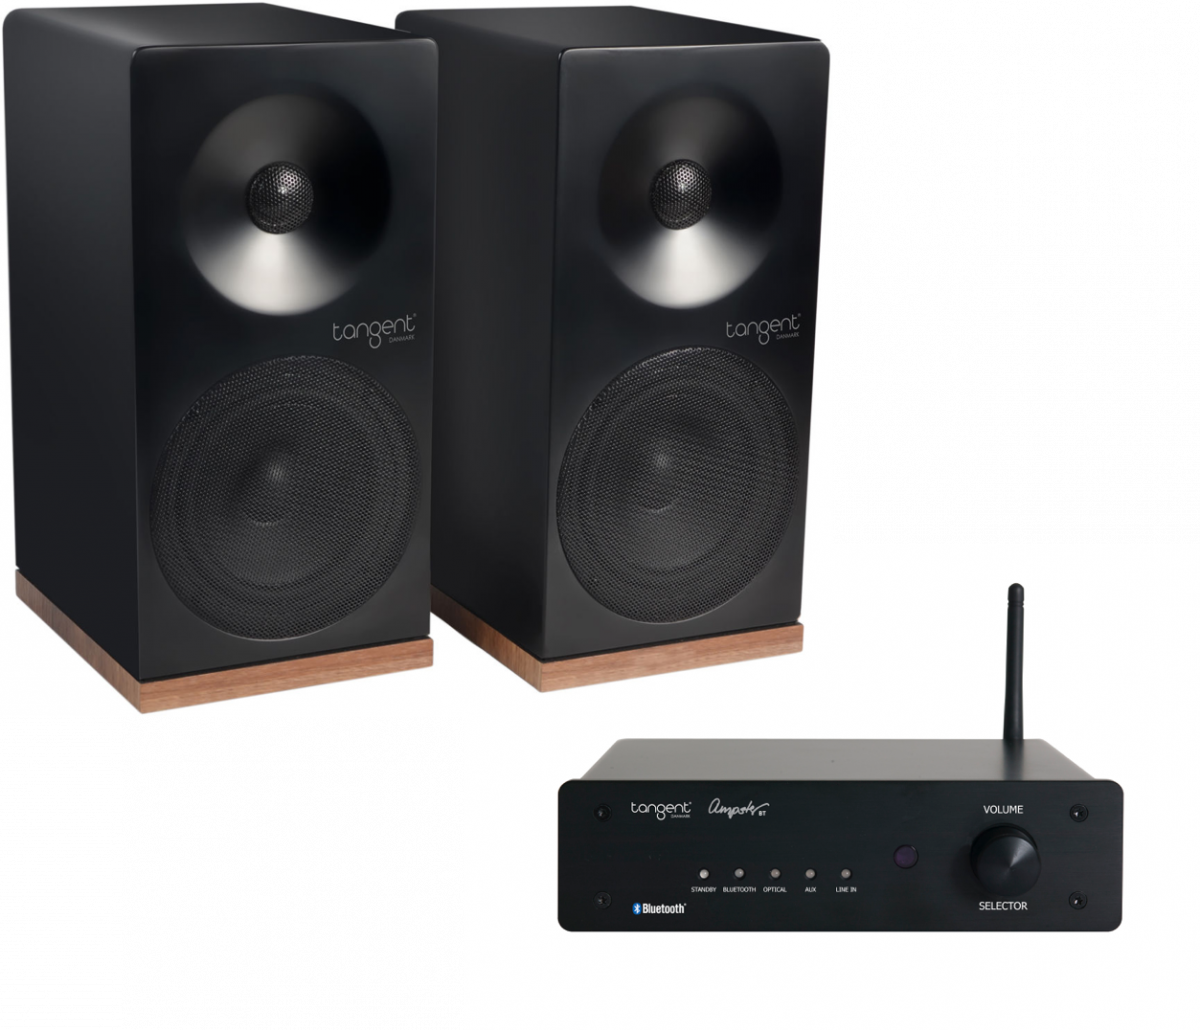 Tangent Hifi systems - wireless - micro systems - mini systems